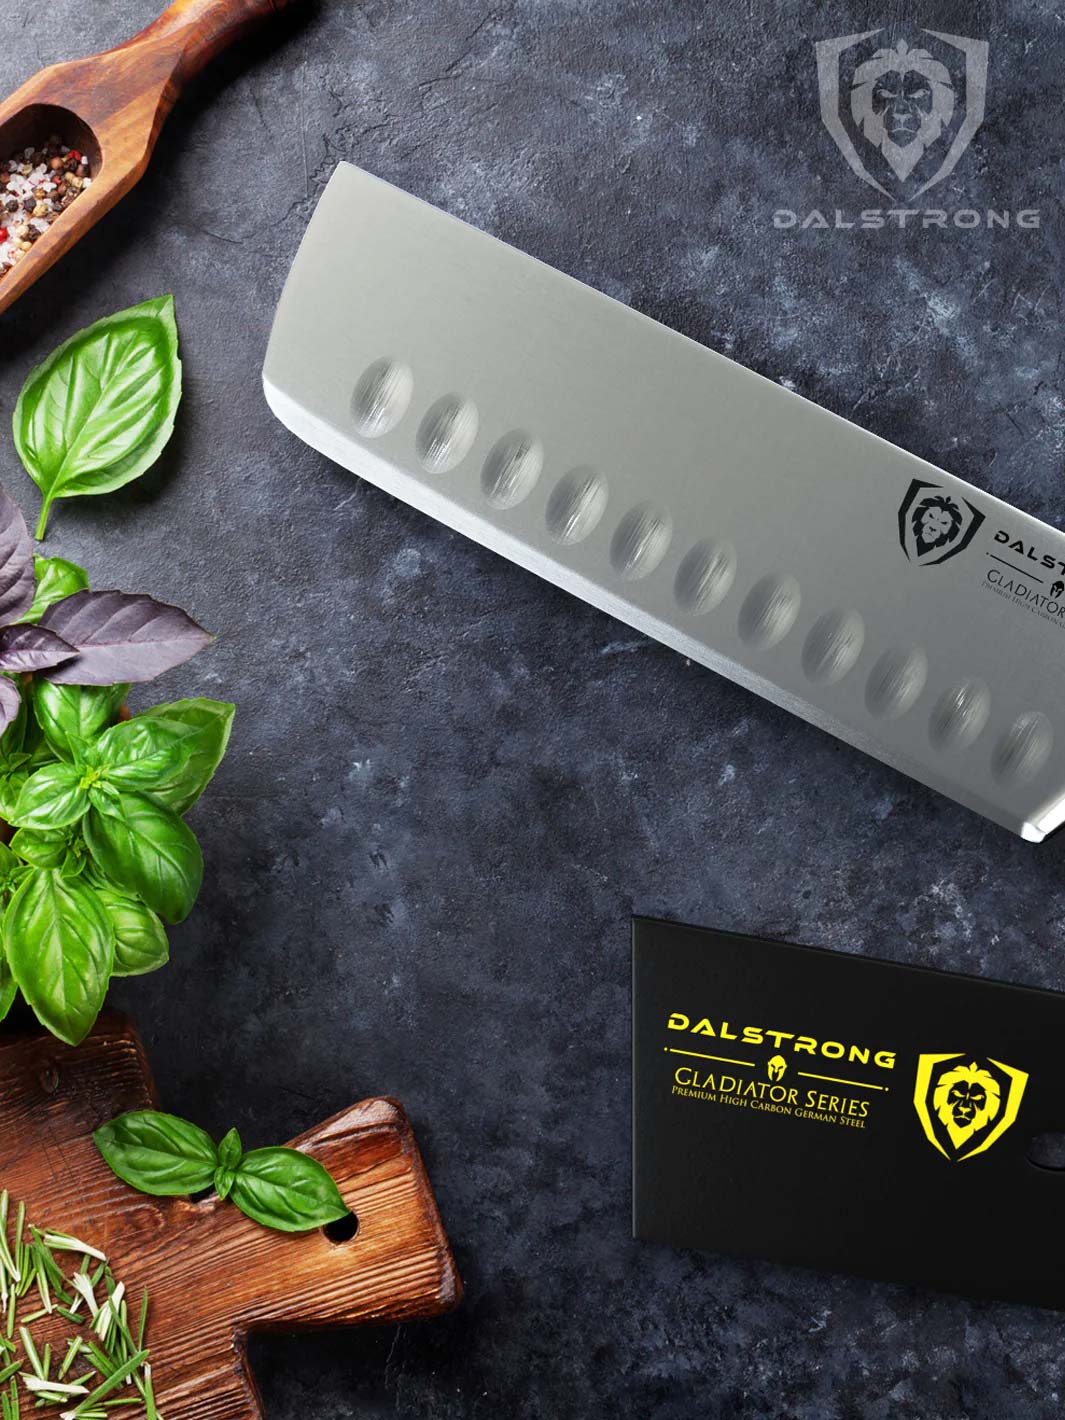 Dalstrong gladiator series 7 inch nakiri knife with black sheath and green leaves on the side.